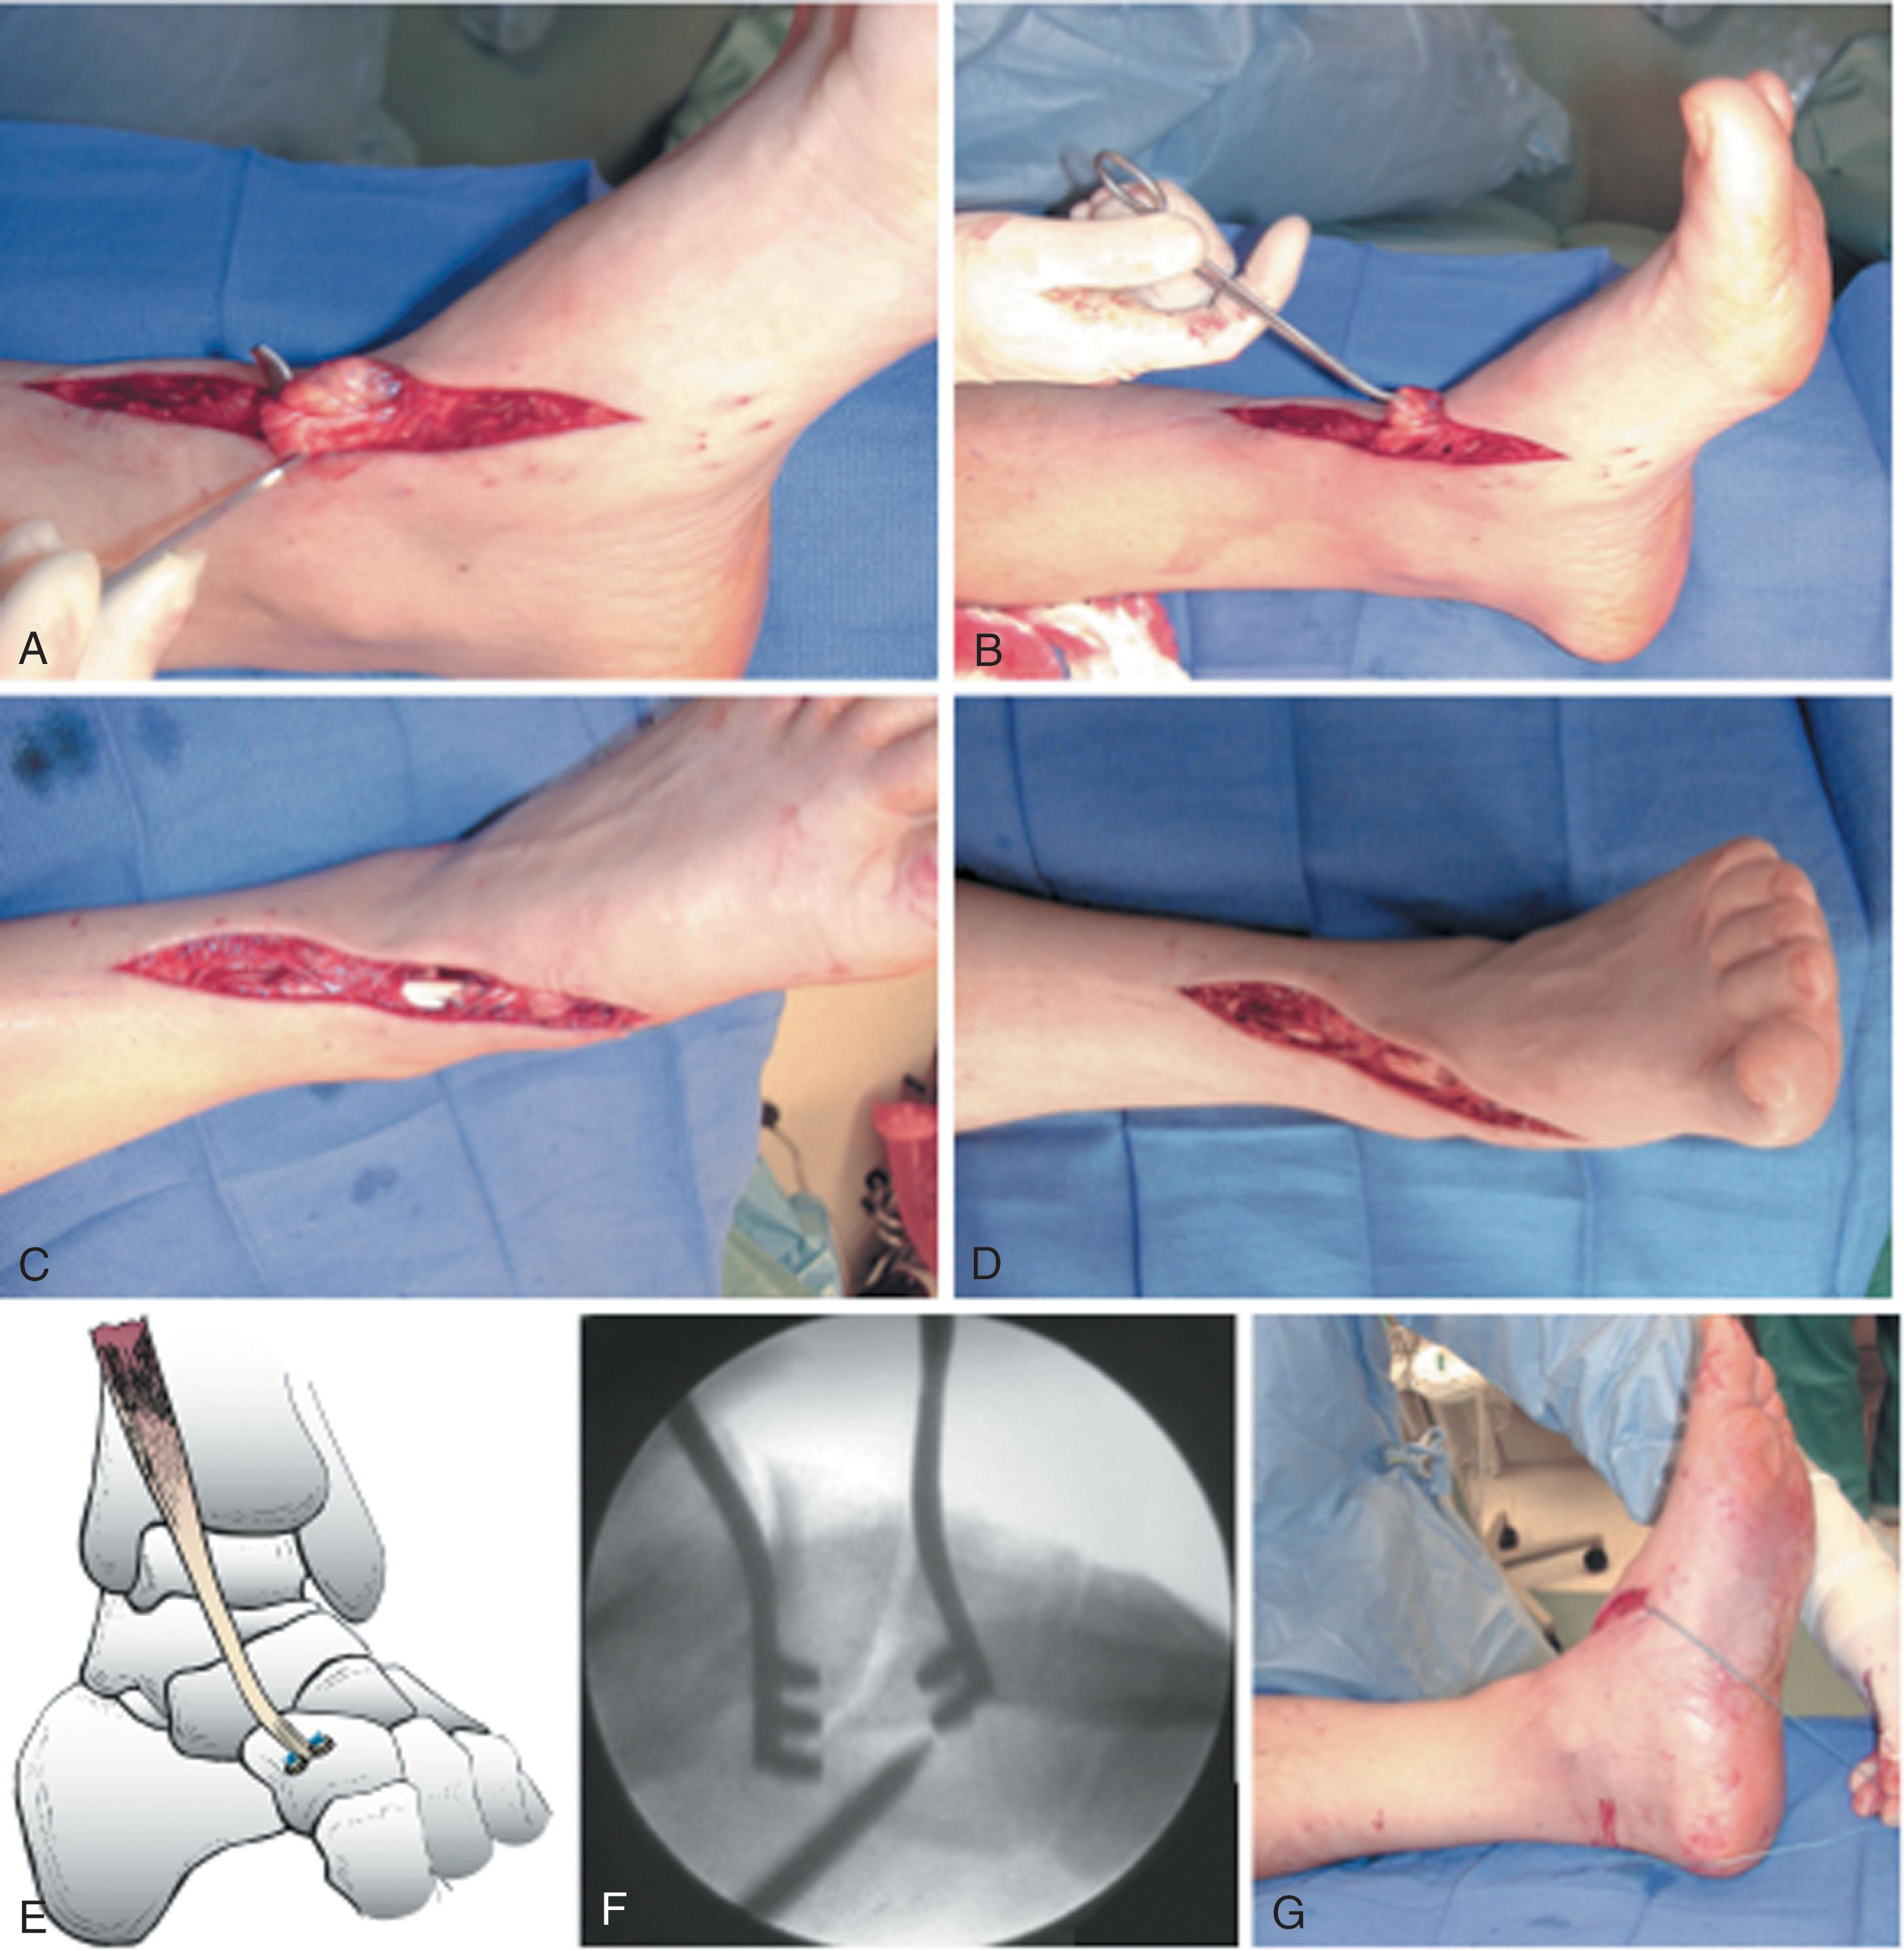 Fig. 28-12, A , Intraoperative photograph demonstrates a hematoma at the site of a recent anterior tibial tendon rupture. B , Ruptured anterior tibial tendon is pulled into the wound. C and D , Intraoperative photograph demonstrates primary repair of the tendon, with adequate dorsiflexion of ankle after repair. E , Placement of suture anchor into the navicular and placement into the cuneiform (F). G , Lateral view of ankle brought into dorsiflexion with securing of the tendon to the suture anchor.